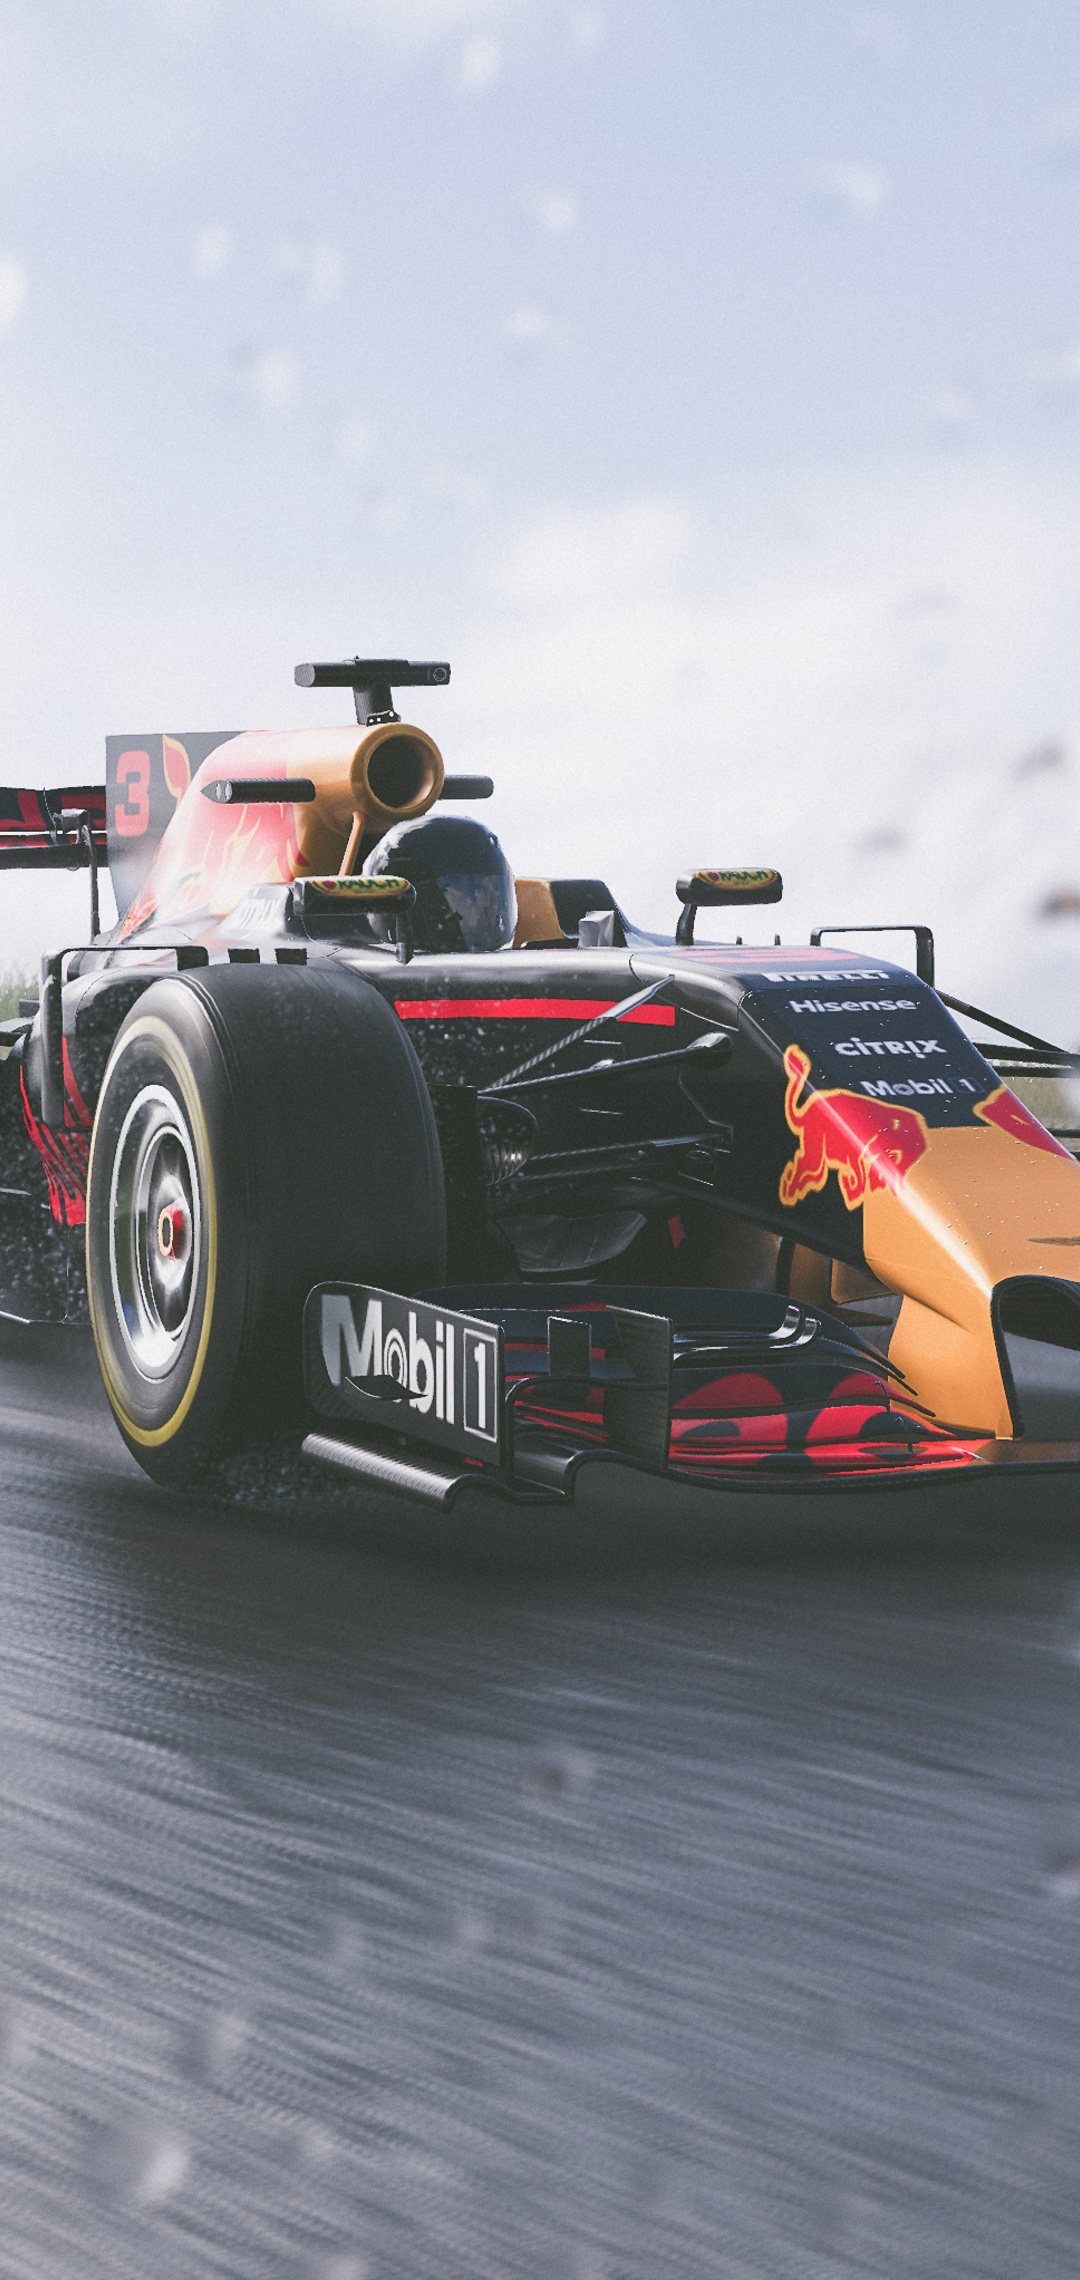 1080x2280 The Crew 2 Red Bull F1 Car 4k One Plus 6,Huawei p20,Honor view 10,Vivo y85,Oppo f7,Xiaomi A2 HD 4k Wallpapers, Images, Photos and Pictures